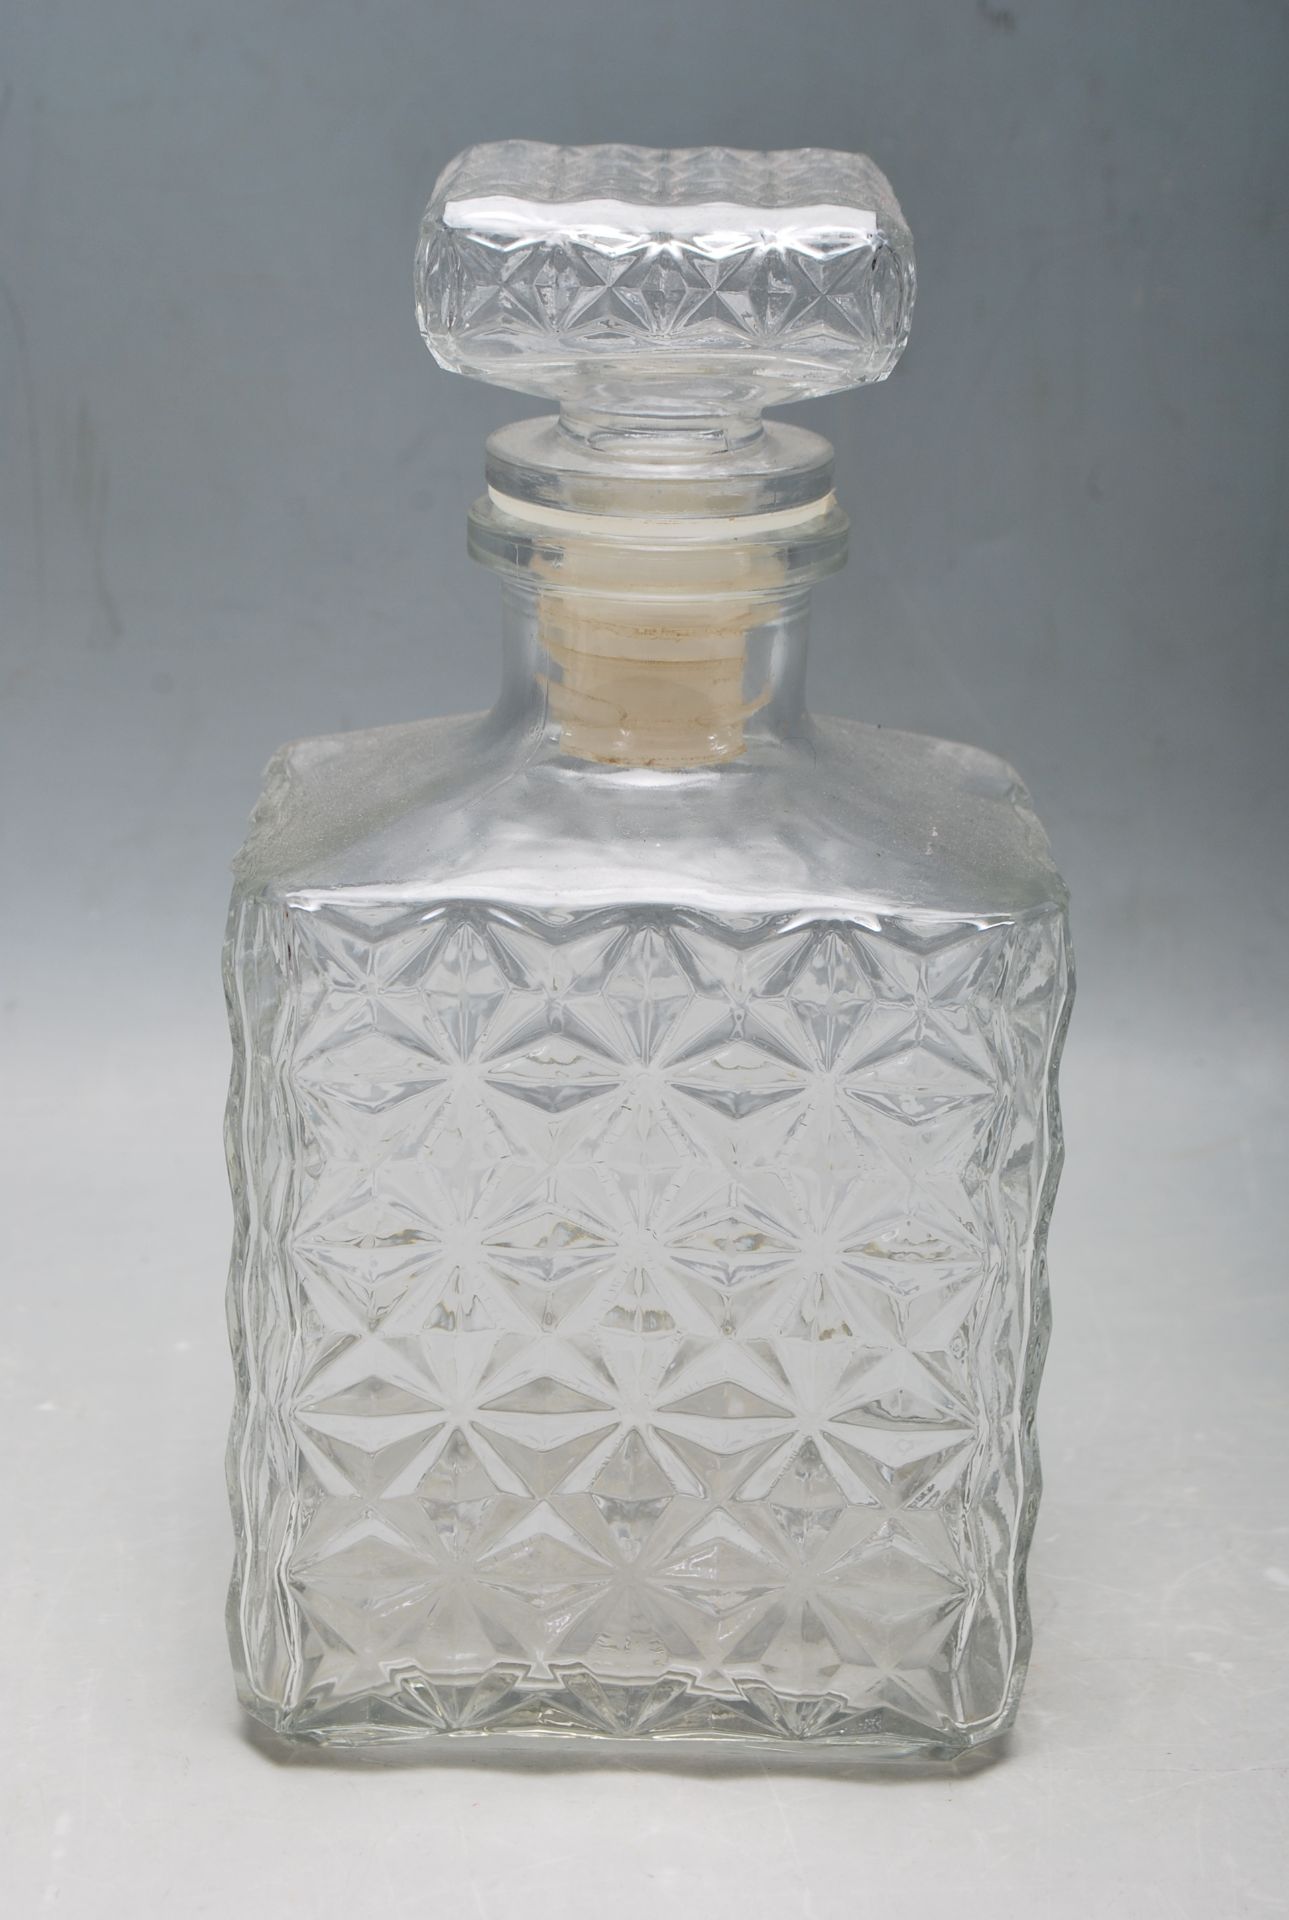 A COLELCTION OF VINTAGE LATE 20TH CENTURY CUT GLASS CRYTAL DECANTERS - Image 3 of 6